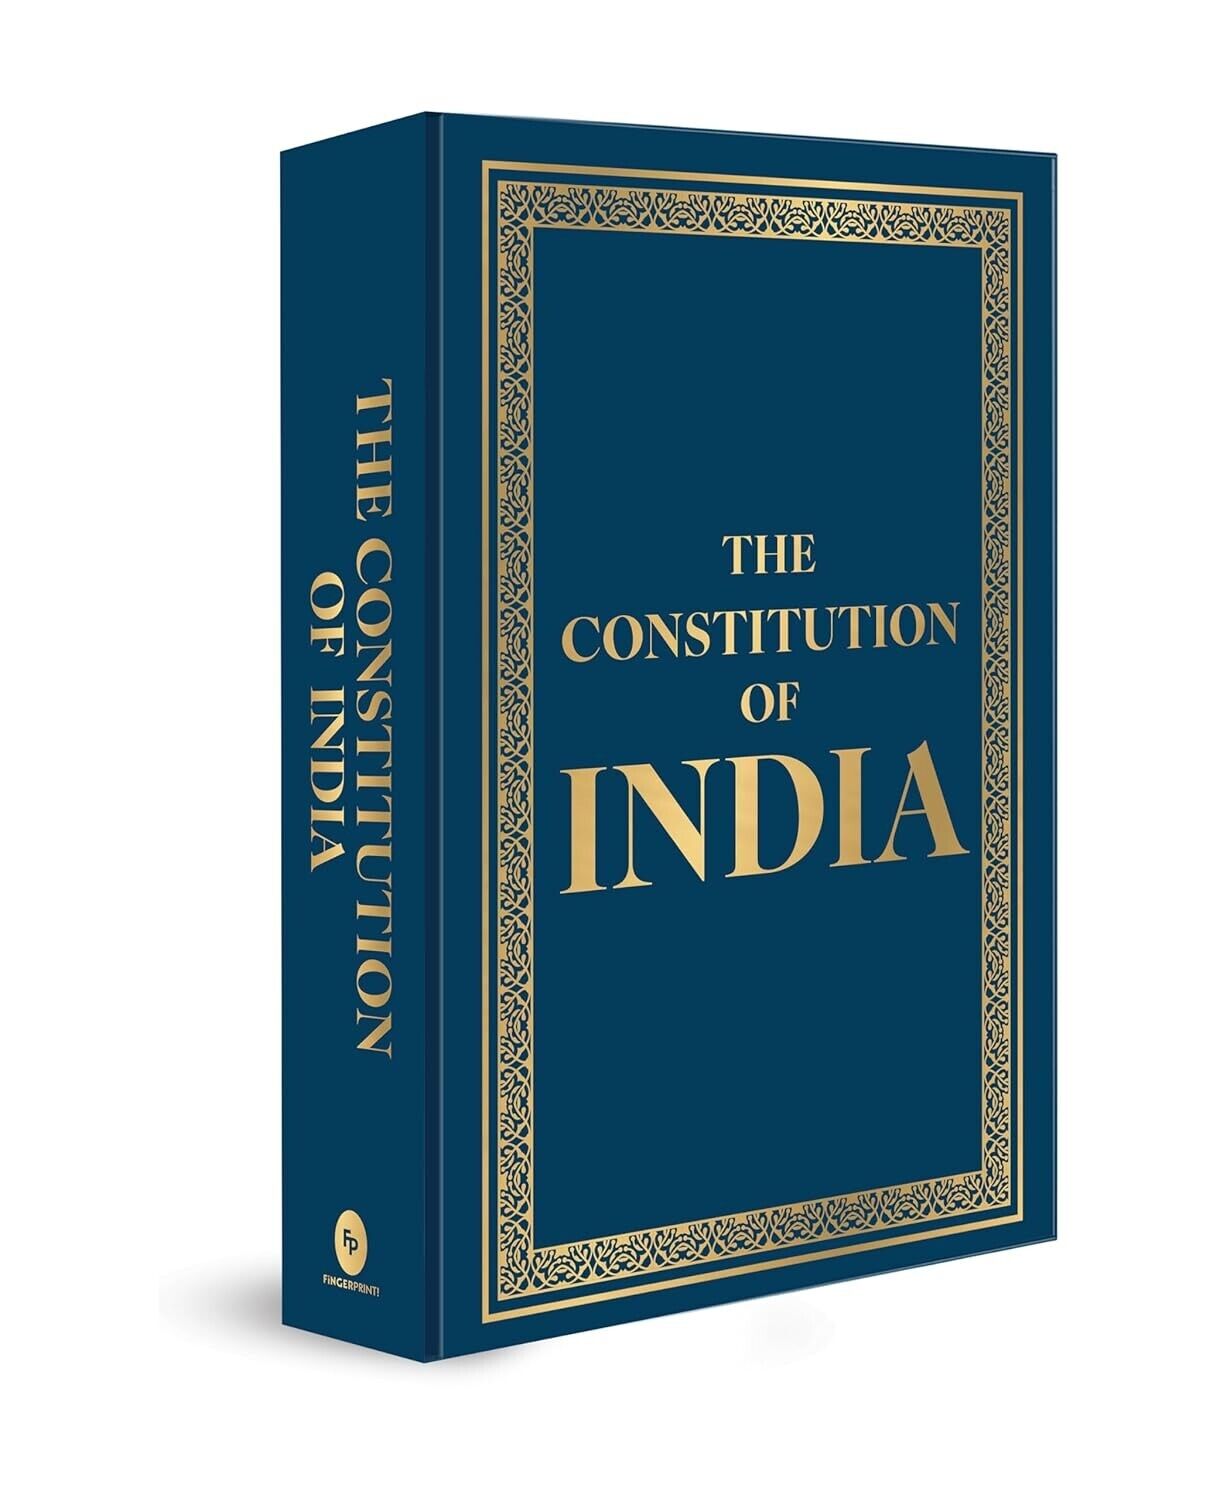 The Constitution of India (Deluxe Hardbound Edition) Hardcover Book, 